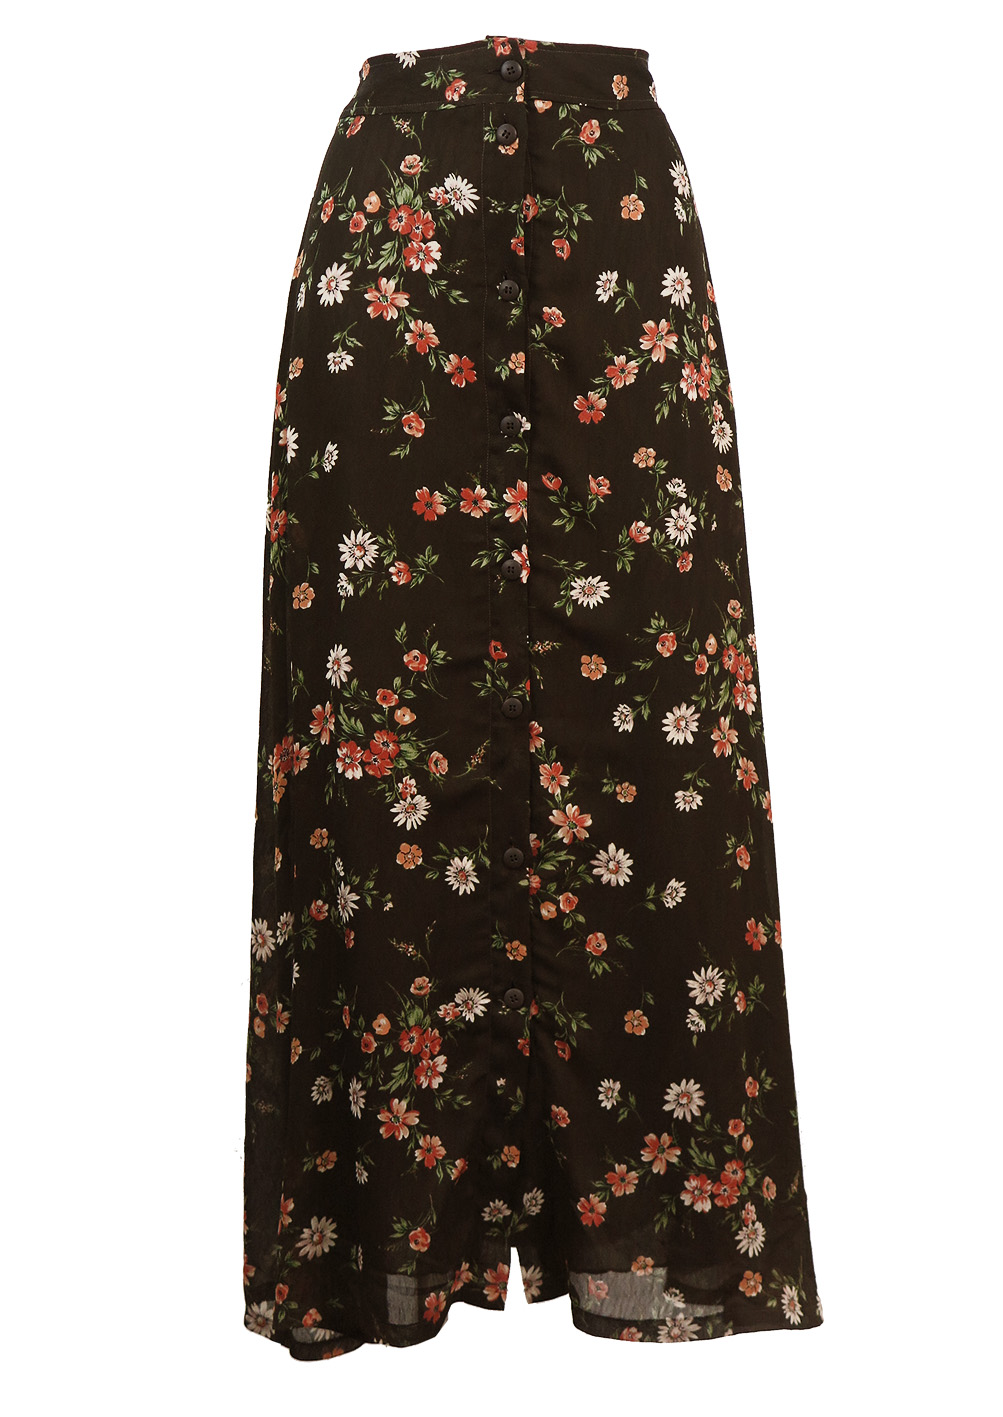 Maxi Skirt with a Brown and Orange Floral Print - S | Reign Vintage